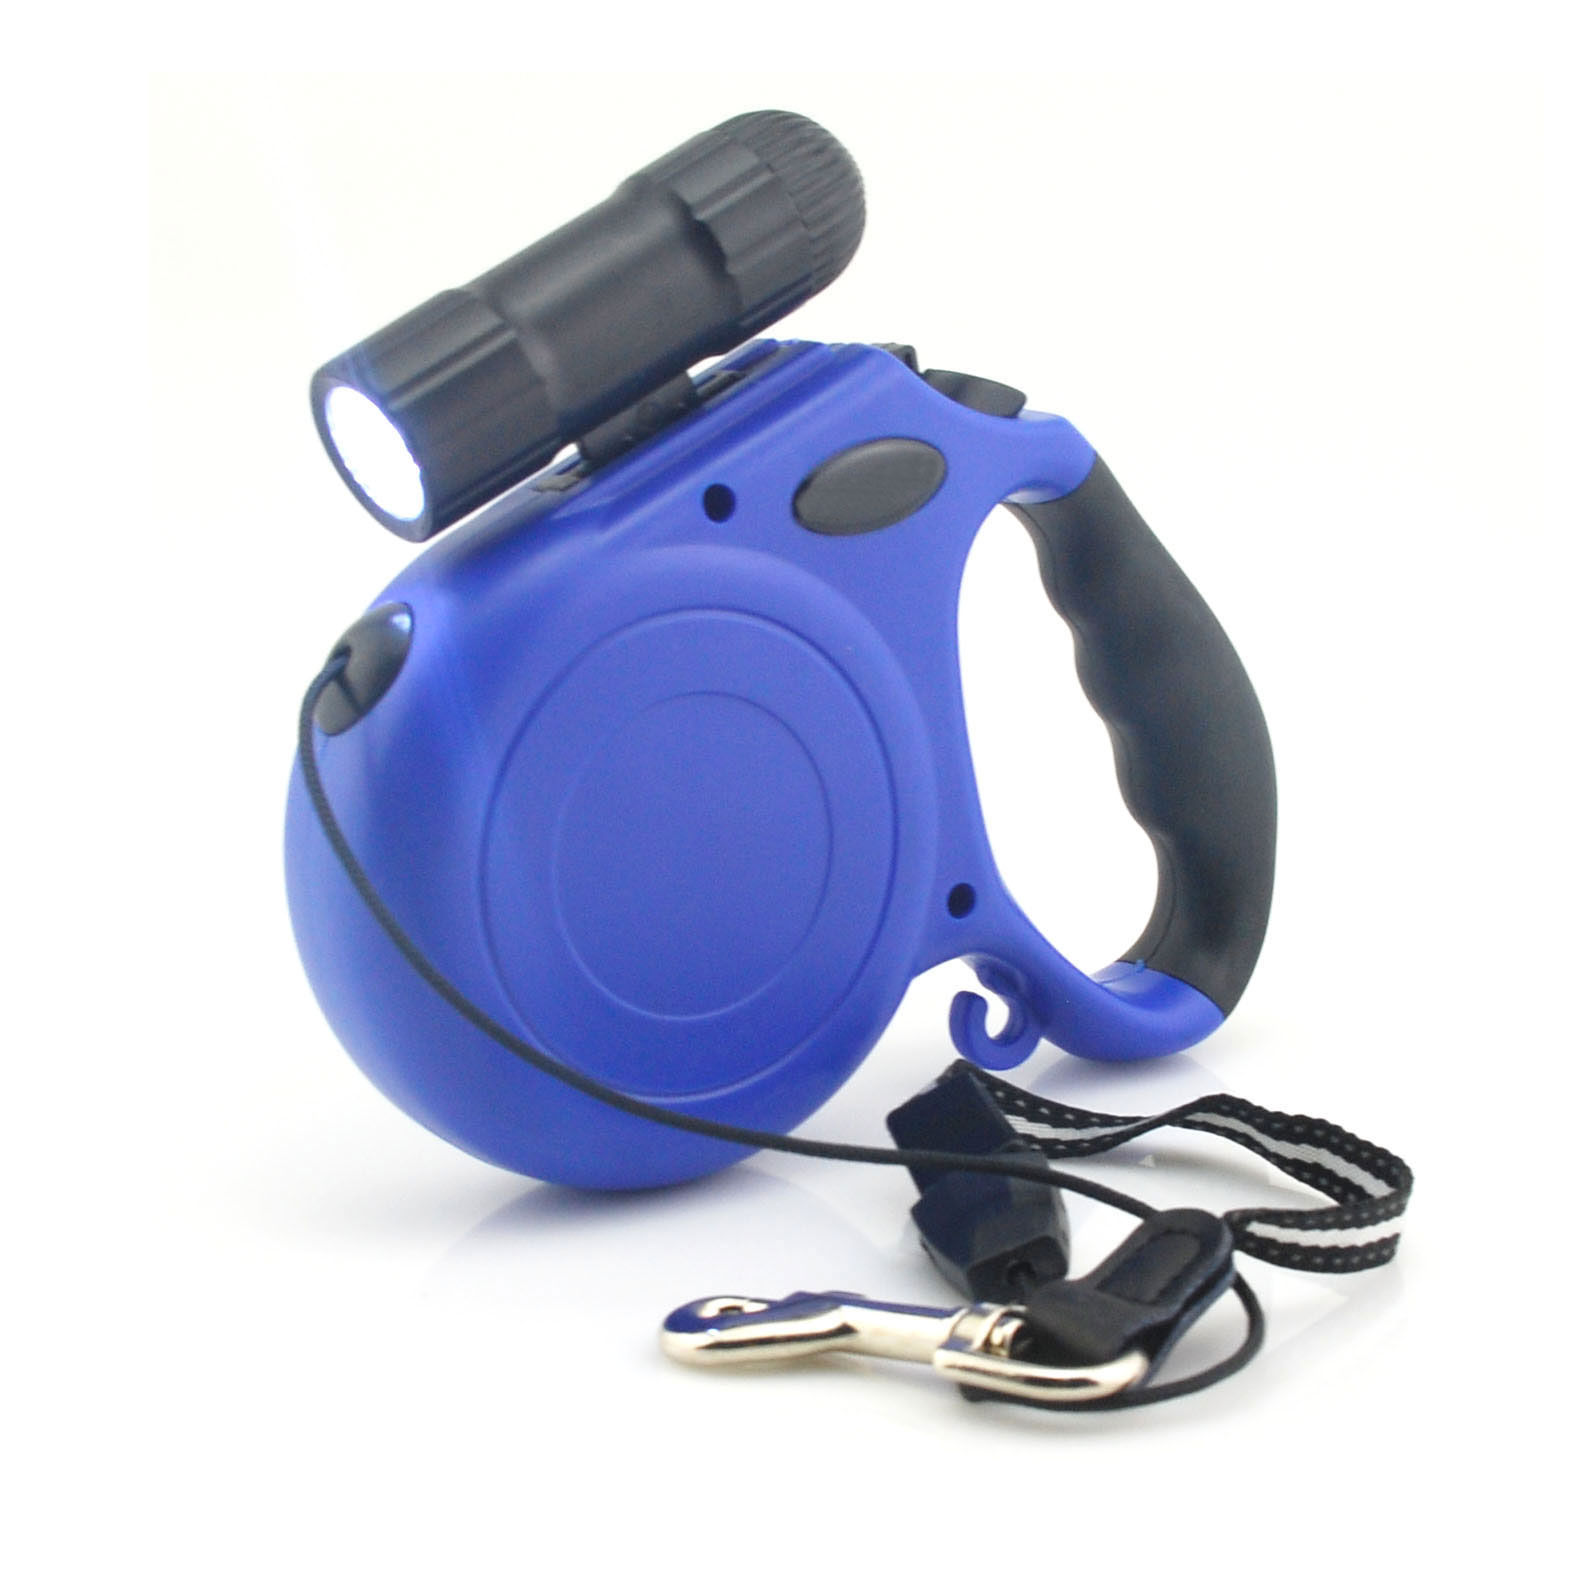 Automatic Retractable 16 ft Pet Dog Leash With Light up to 88 lbs